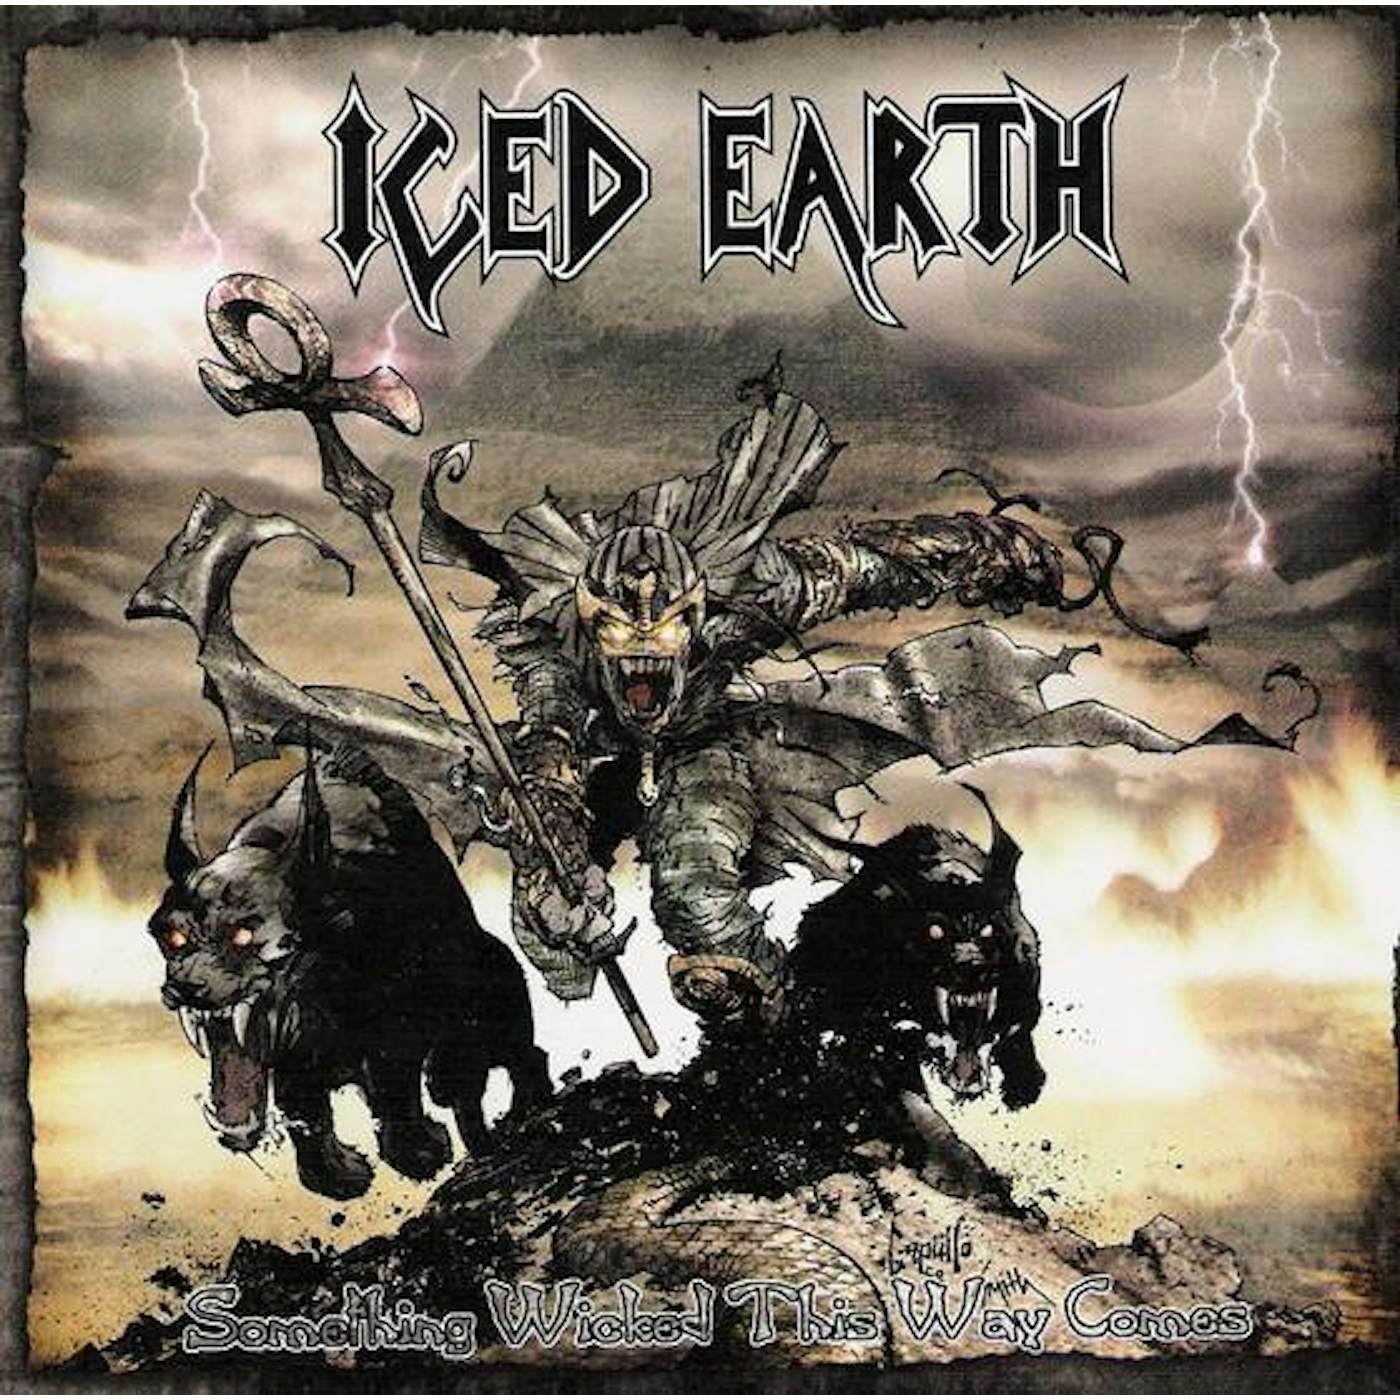 Iced Earth SOMETHING WICKED THIS WAY COMES CD